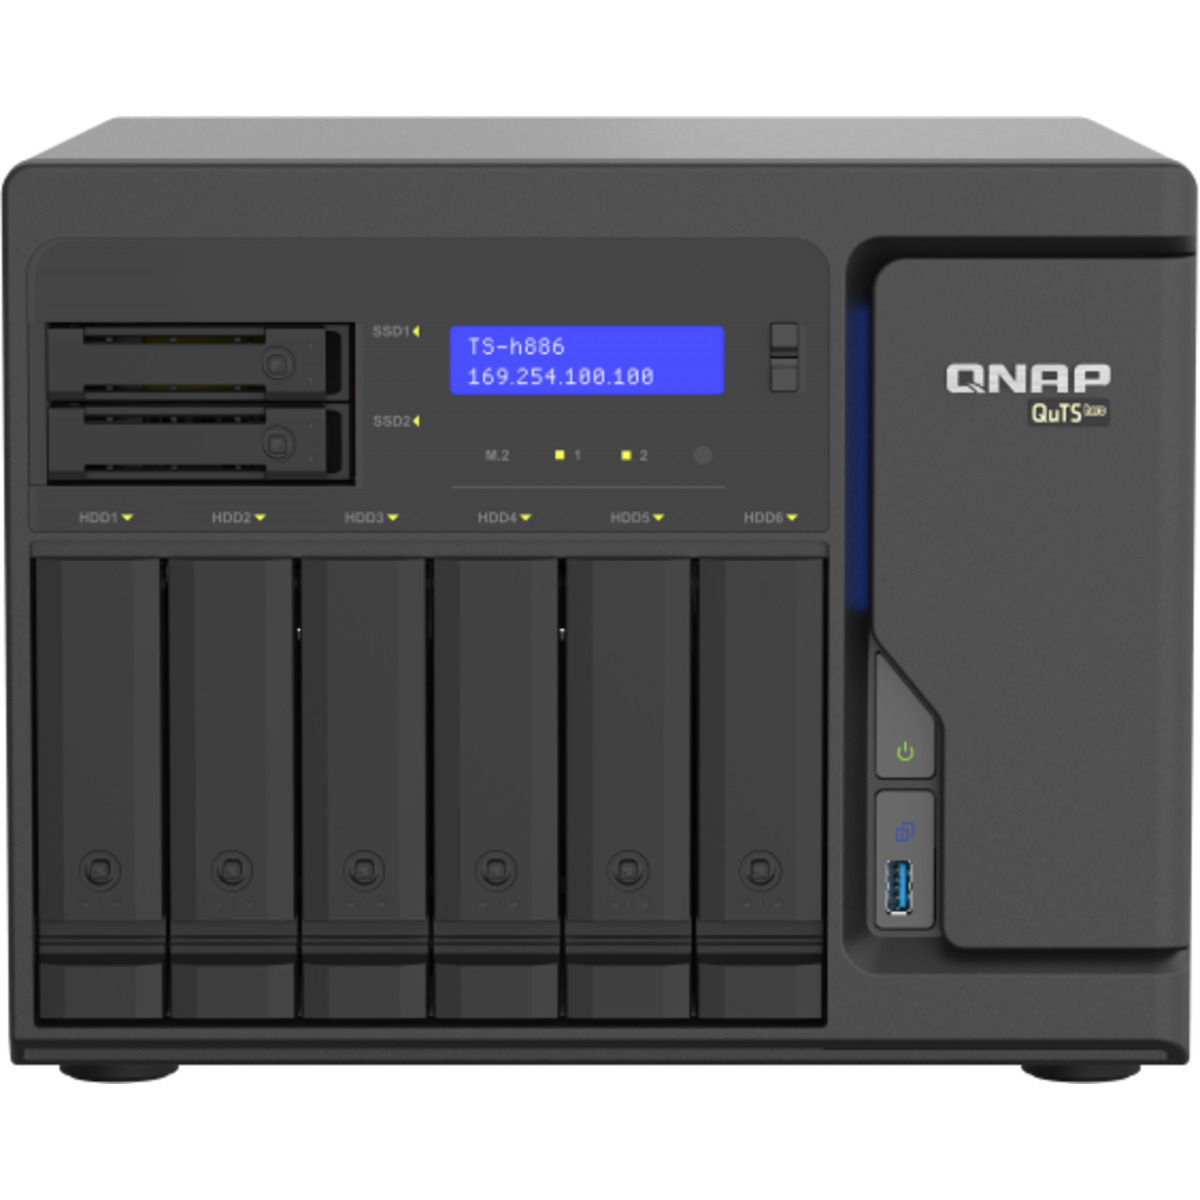 QNAP TS-h886 QuTS hero NAS 32tb 6+2-Bay Desktop Large Business / Enterprise NAS - Network Attached Storage Device 4x8tb TeamGroup EX2 Elite T253E2008T0C101 2.5 550/520MB/s SATA 6Gb/s SSD CONSUMER Class Drives Installed - Burn-In Tested TS-h886 QuTS hero NAS